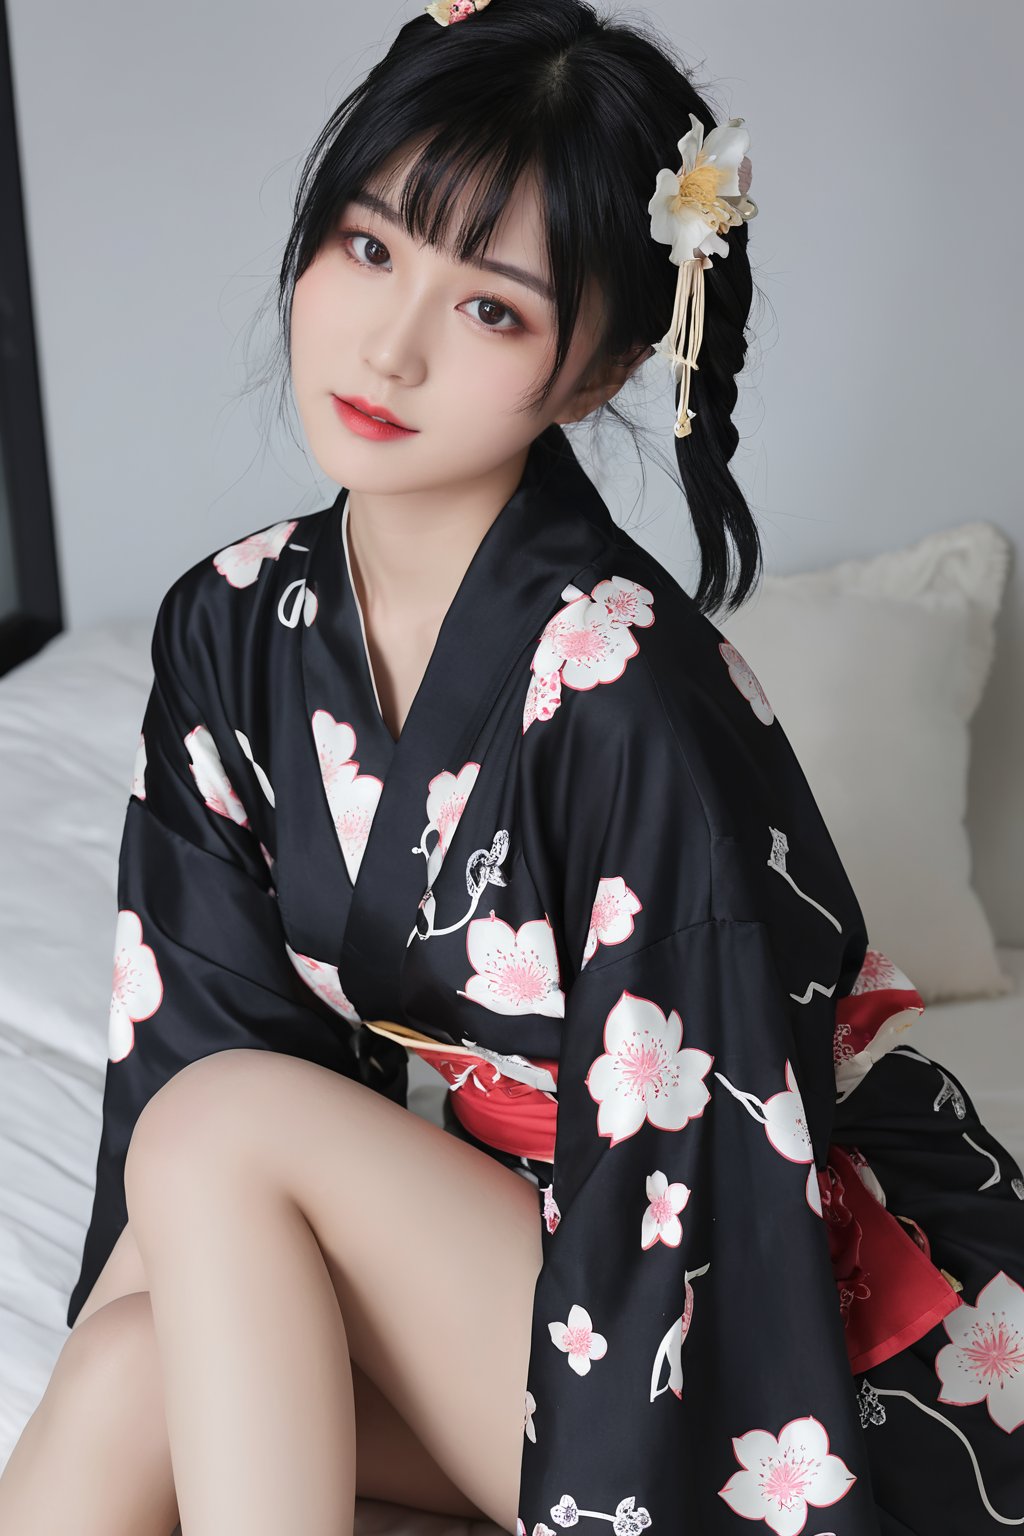 26yo hubggirl, wearing kimono, Sakura Theme,

Orgasmic expressions, lewd smiles, solo,(dark:1.4),deep shadow,darkness,moonlight, absur dres, highly detailed woman, extremely detailed eyes and face,piercing red eyes, detailed clothes, skinny, (Japan, こかわさゆき), twin tails, bangs, frills, skirt, black hair, half classicism half surreal lady, mystery style tattoo, 

film photography aesthetic, dynamic composition, skin texture, sharp focus, hard shadows